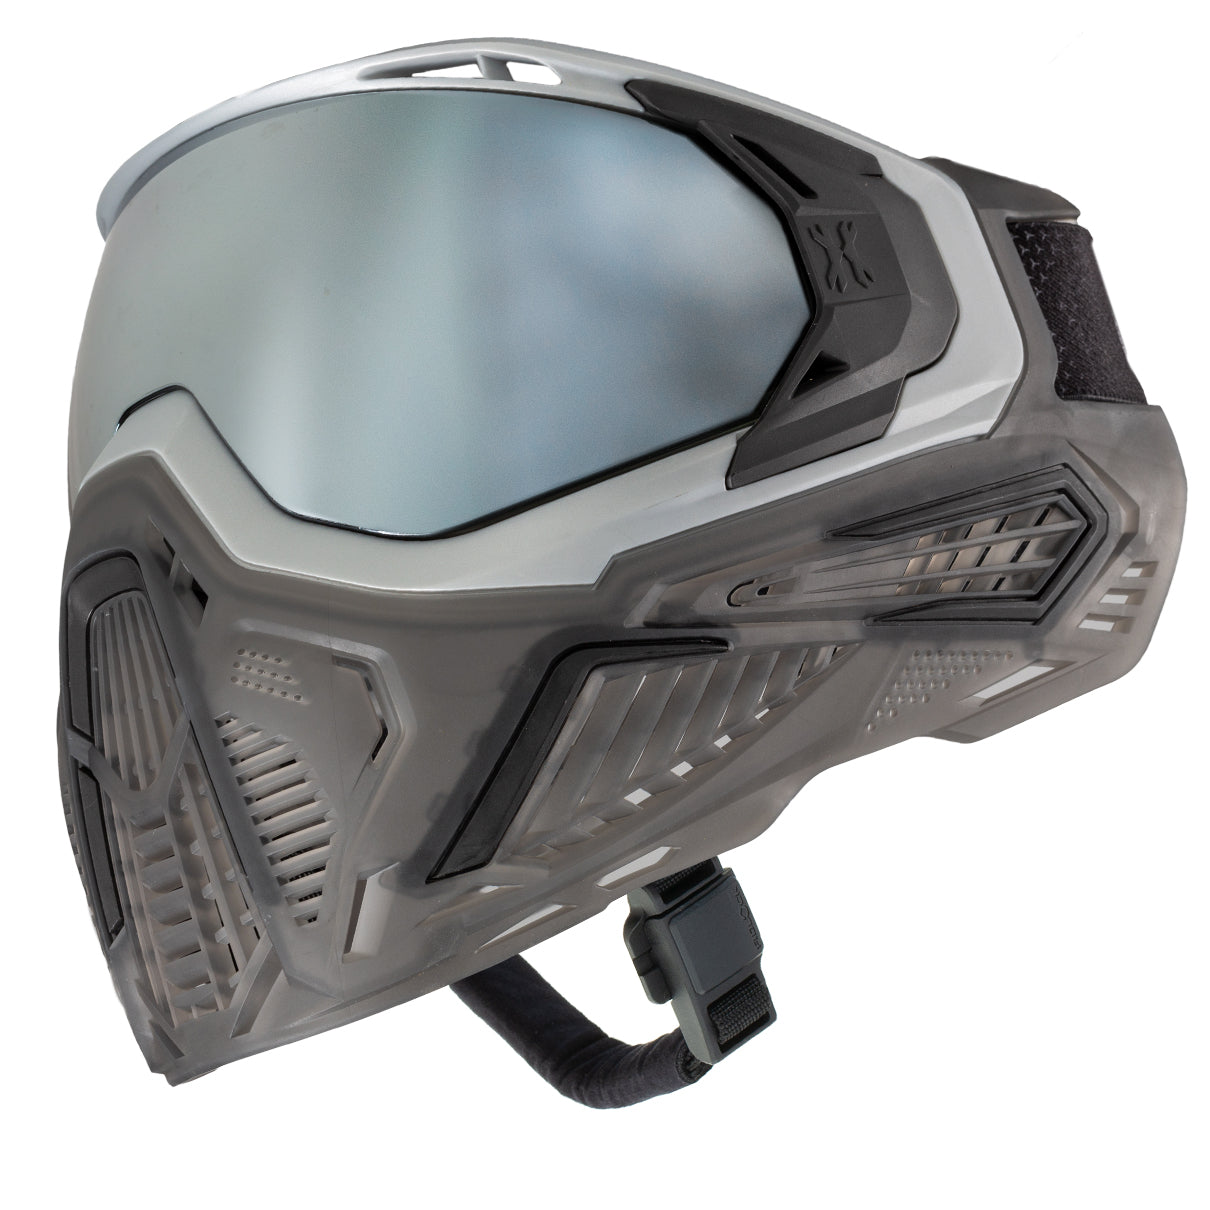 HK Army SLR Paintball Goggle - Graphite (Silver Lens)